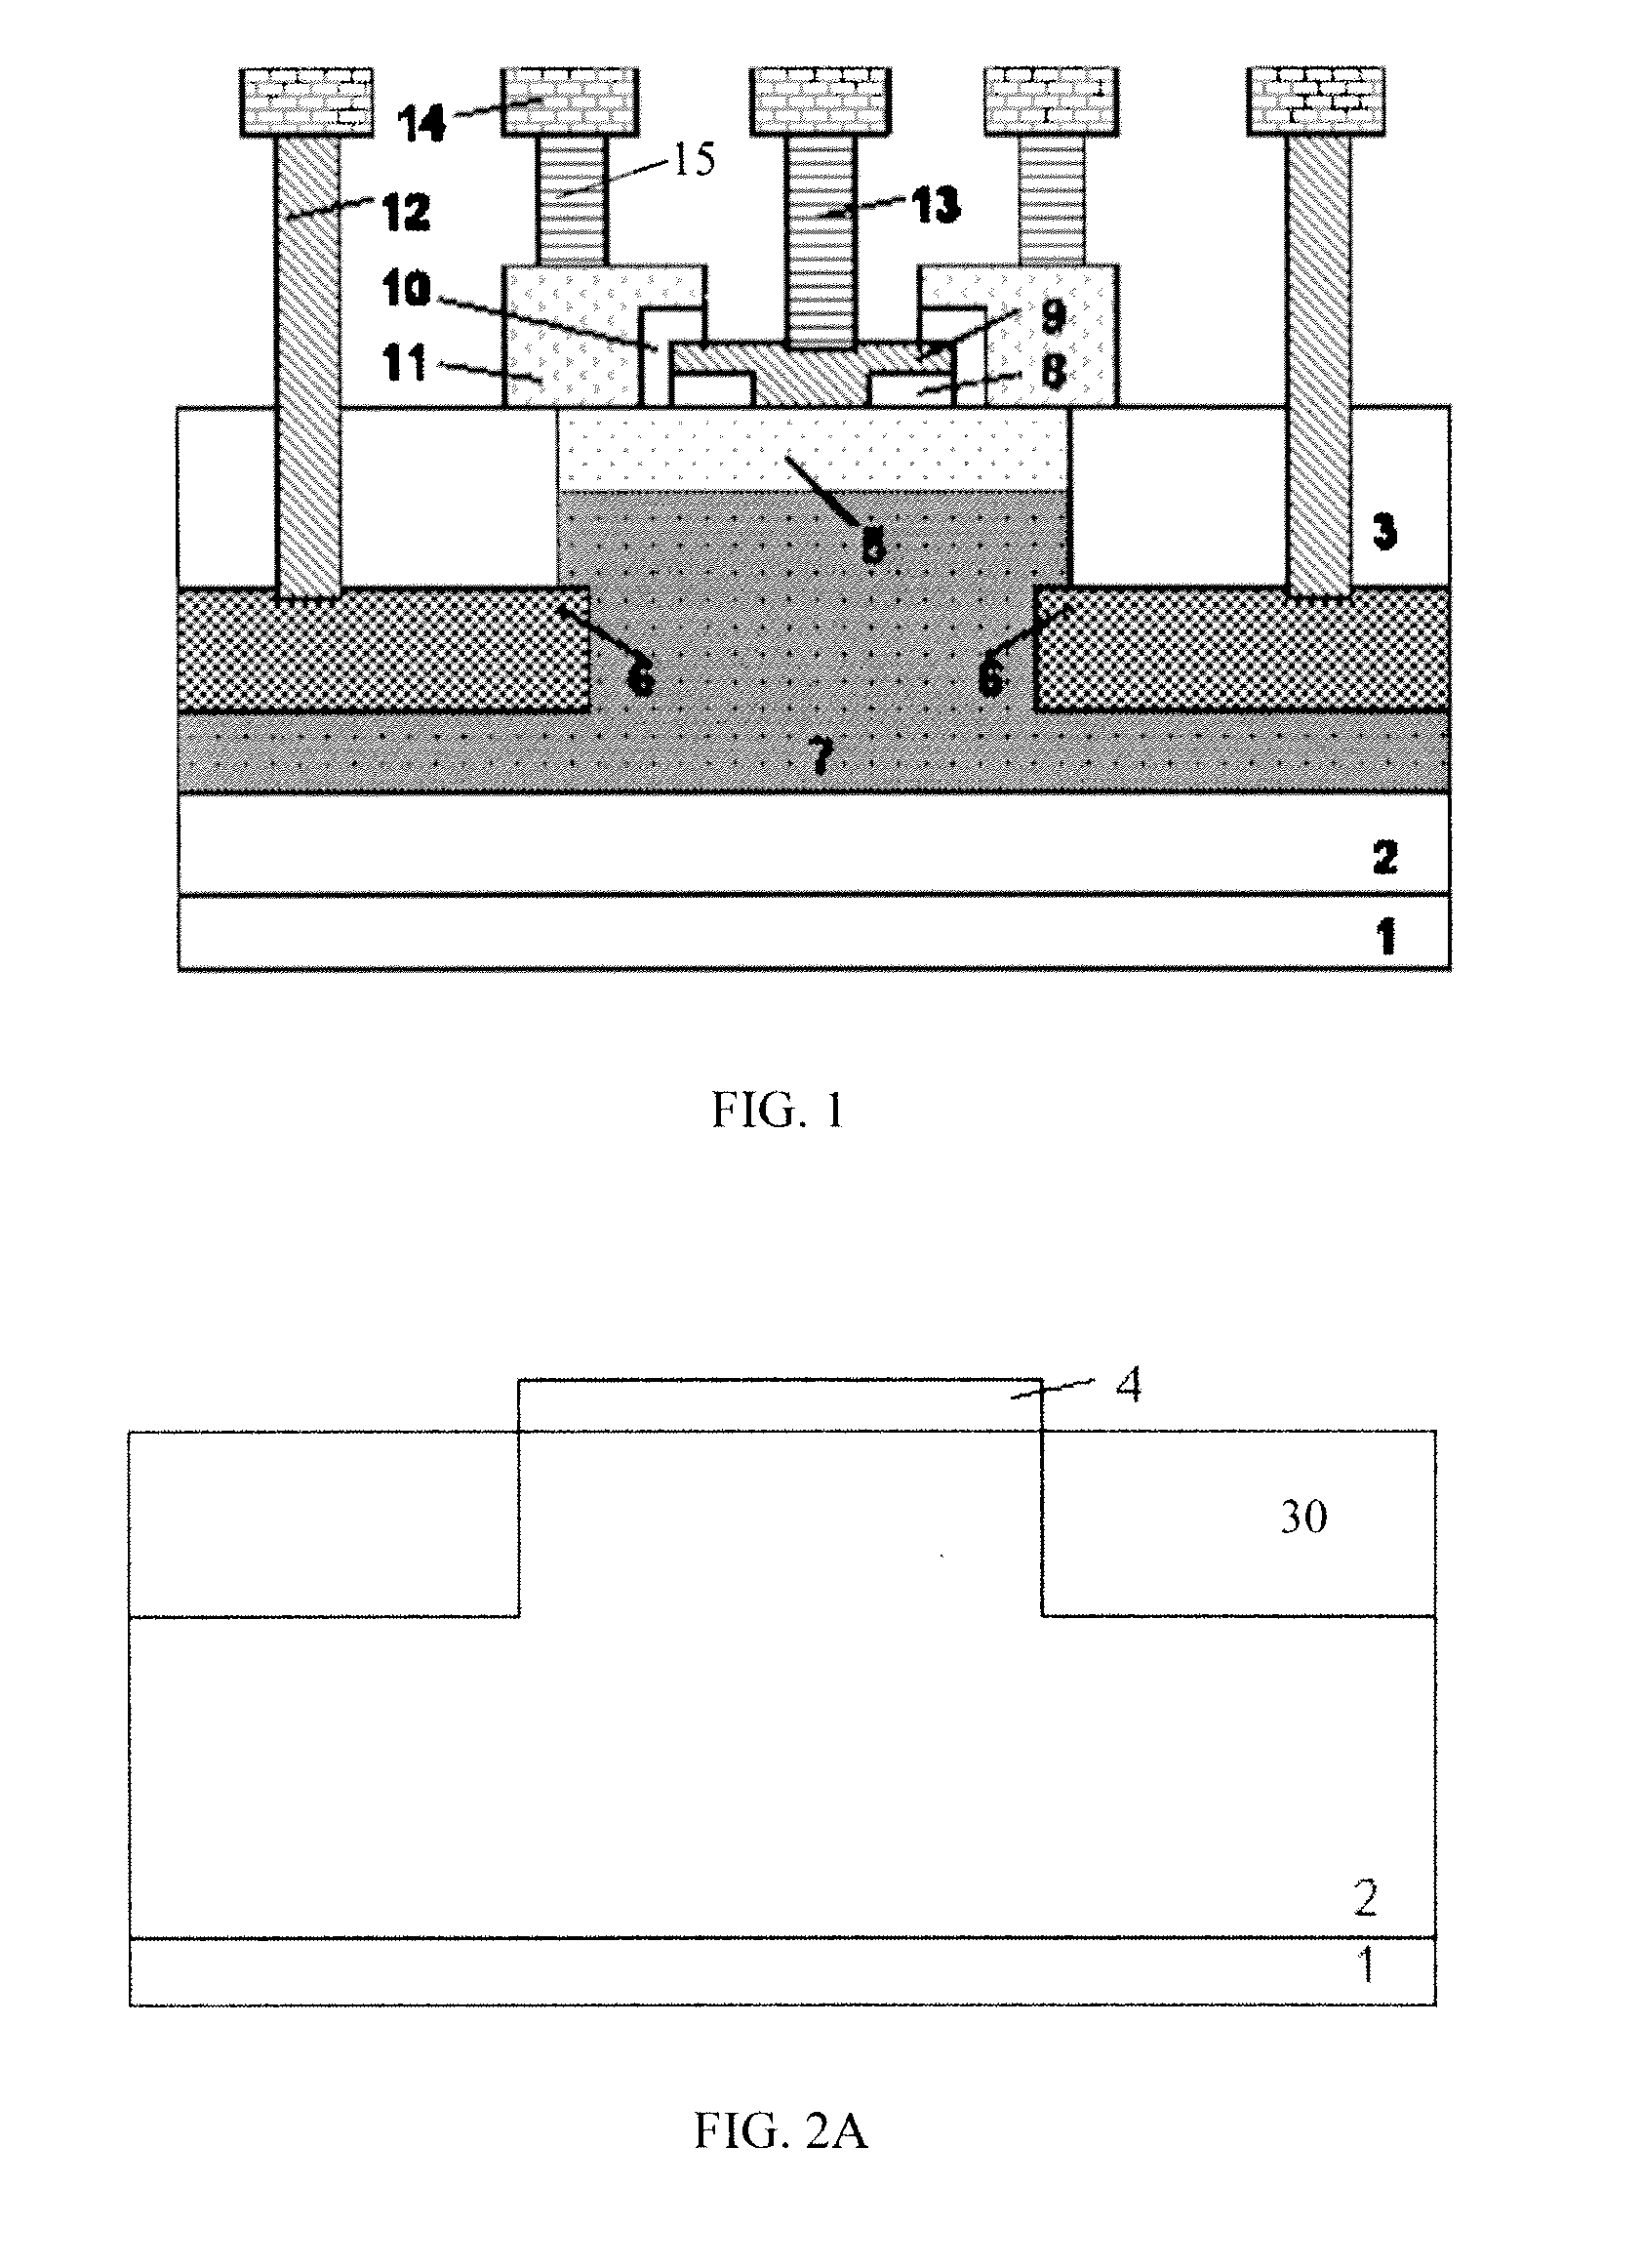 Vertical parasitic pnp device in a bicmos process and manufacturing method of the same